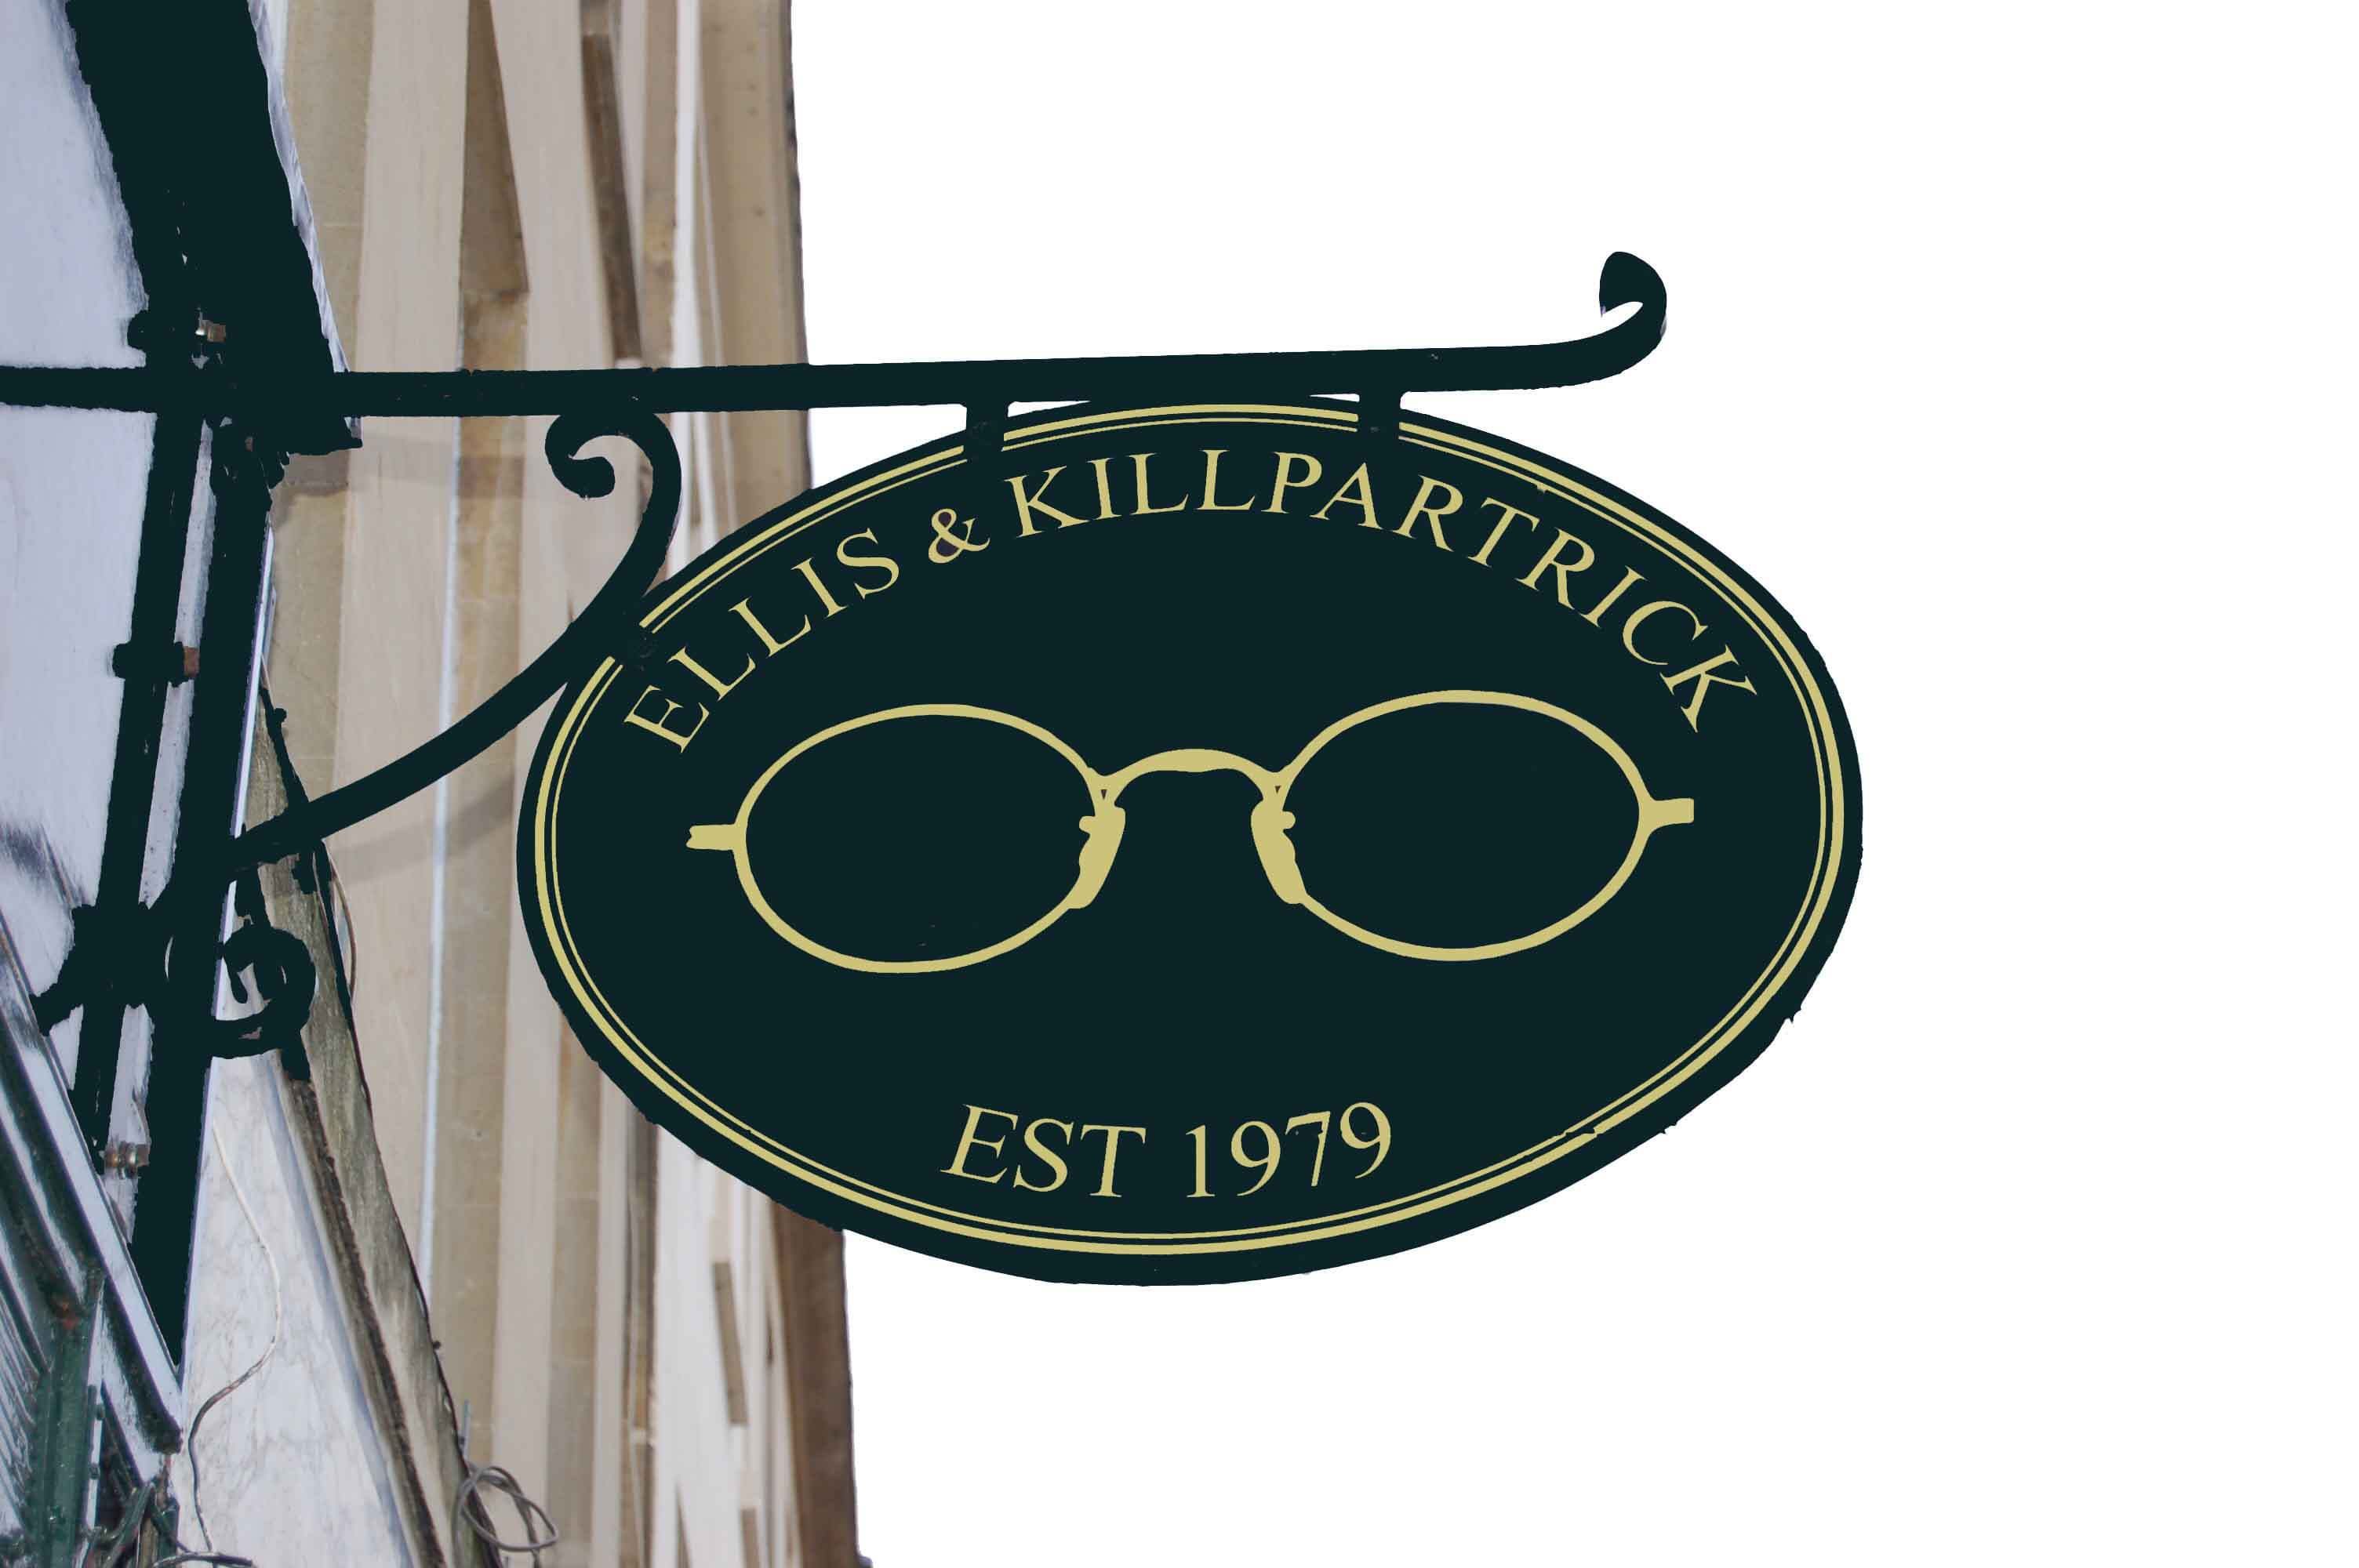 Ellis and Killpartrick logo and sign.